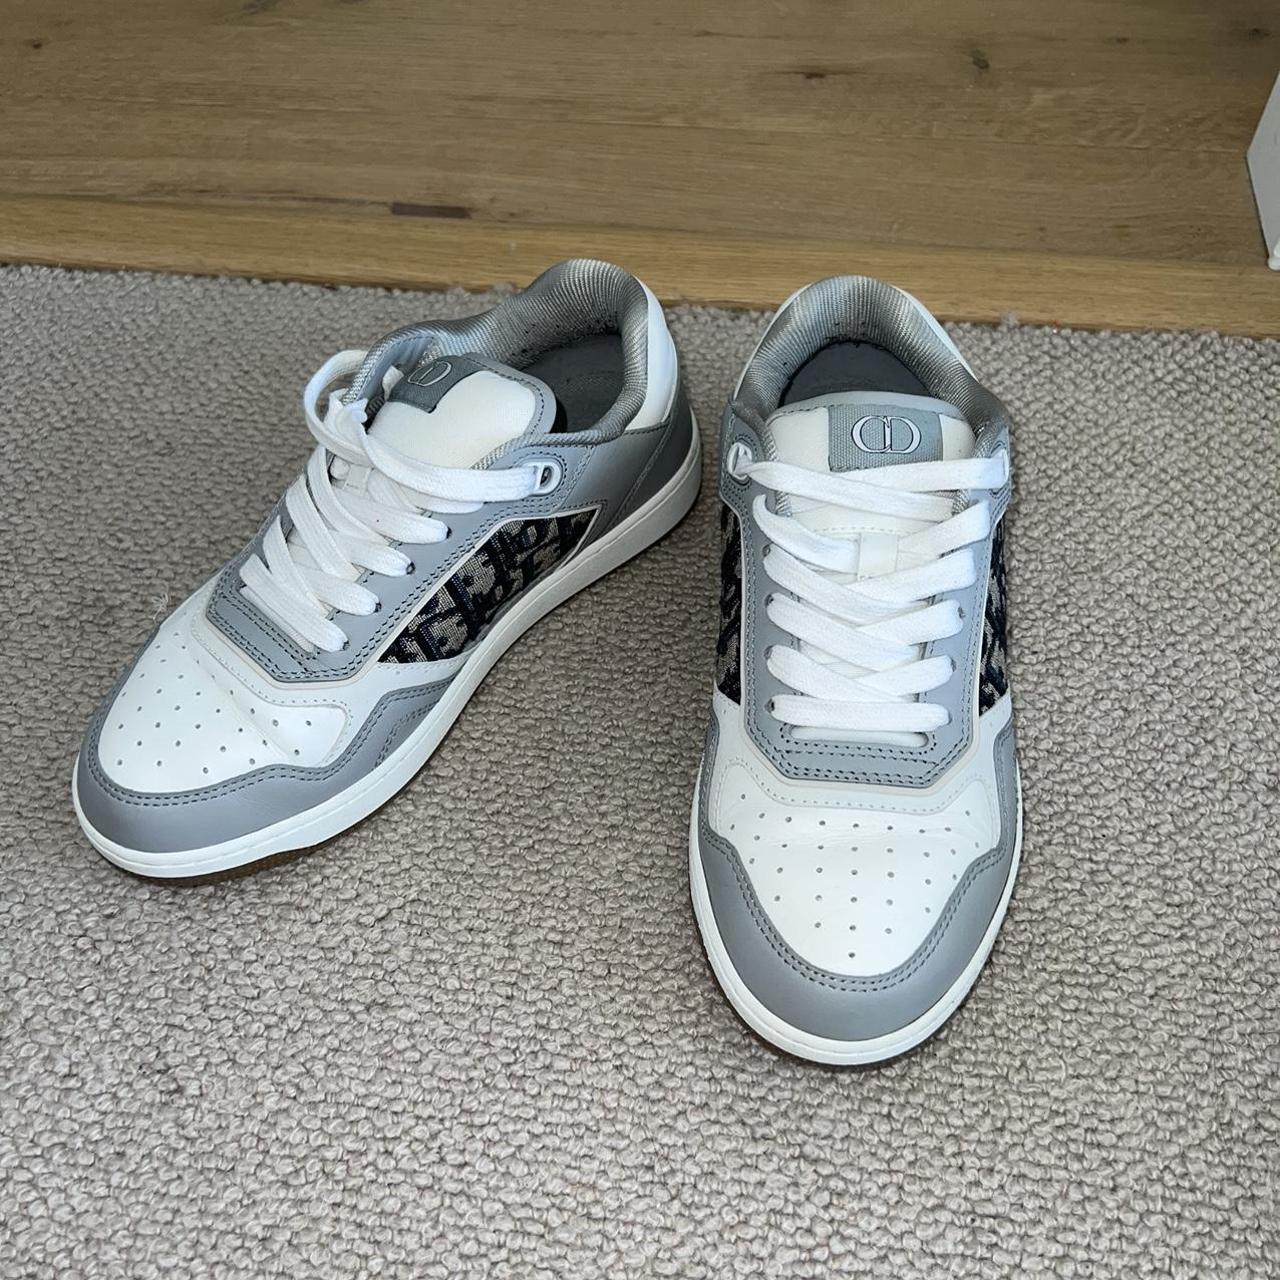 Dior trainers size 4 fits a size 5 easily. Barely... - Depop